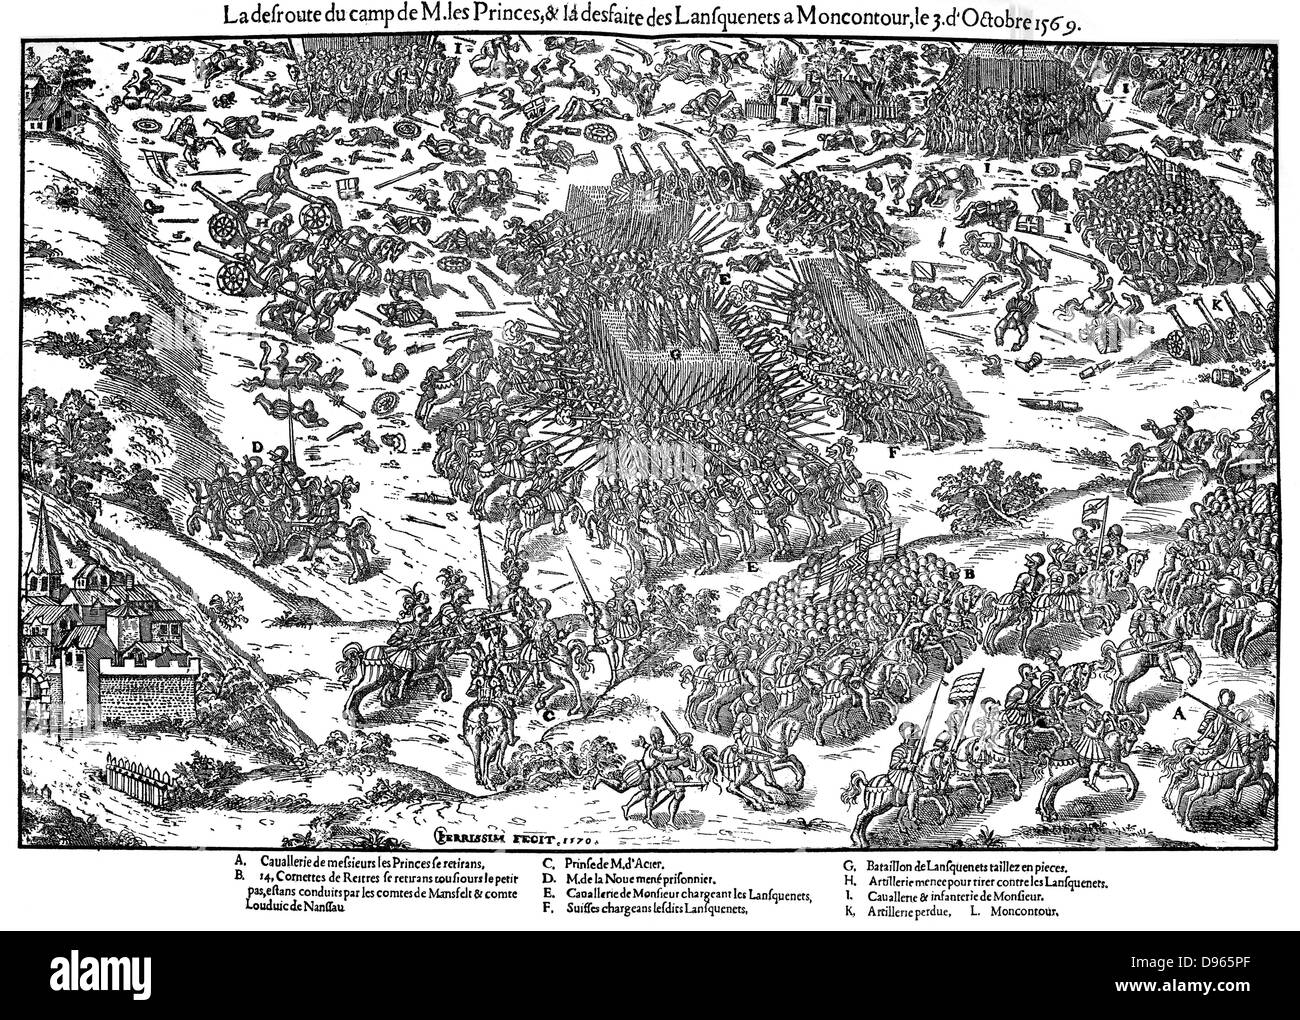 French Religious Wars 1562-1598. Battle of Montcontour 3 October  1569. Huguenots under Gaspard Coligny (1519-1572) took heavy losses during defeat by Catholics under Henry, duc d'Anjou (1551-1580), Henry III of France from 1574. In right foreground, Huguenots are retreating. Engraving by Jacques Tortorel (fl1568-1590) and Jean-Jacques Perrissin (1536-1617) from their series on the Huguenot Wars, c1570. Stock Photo